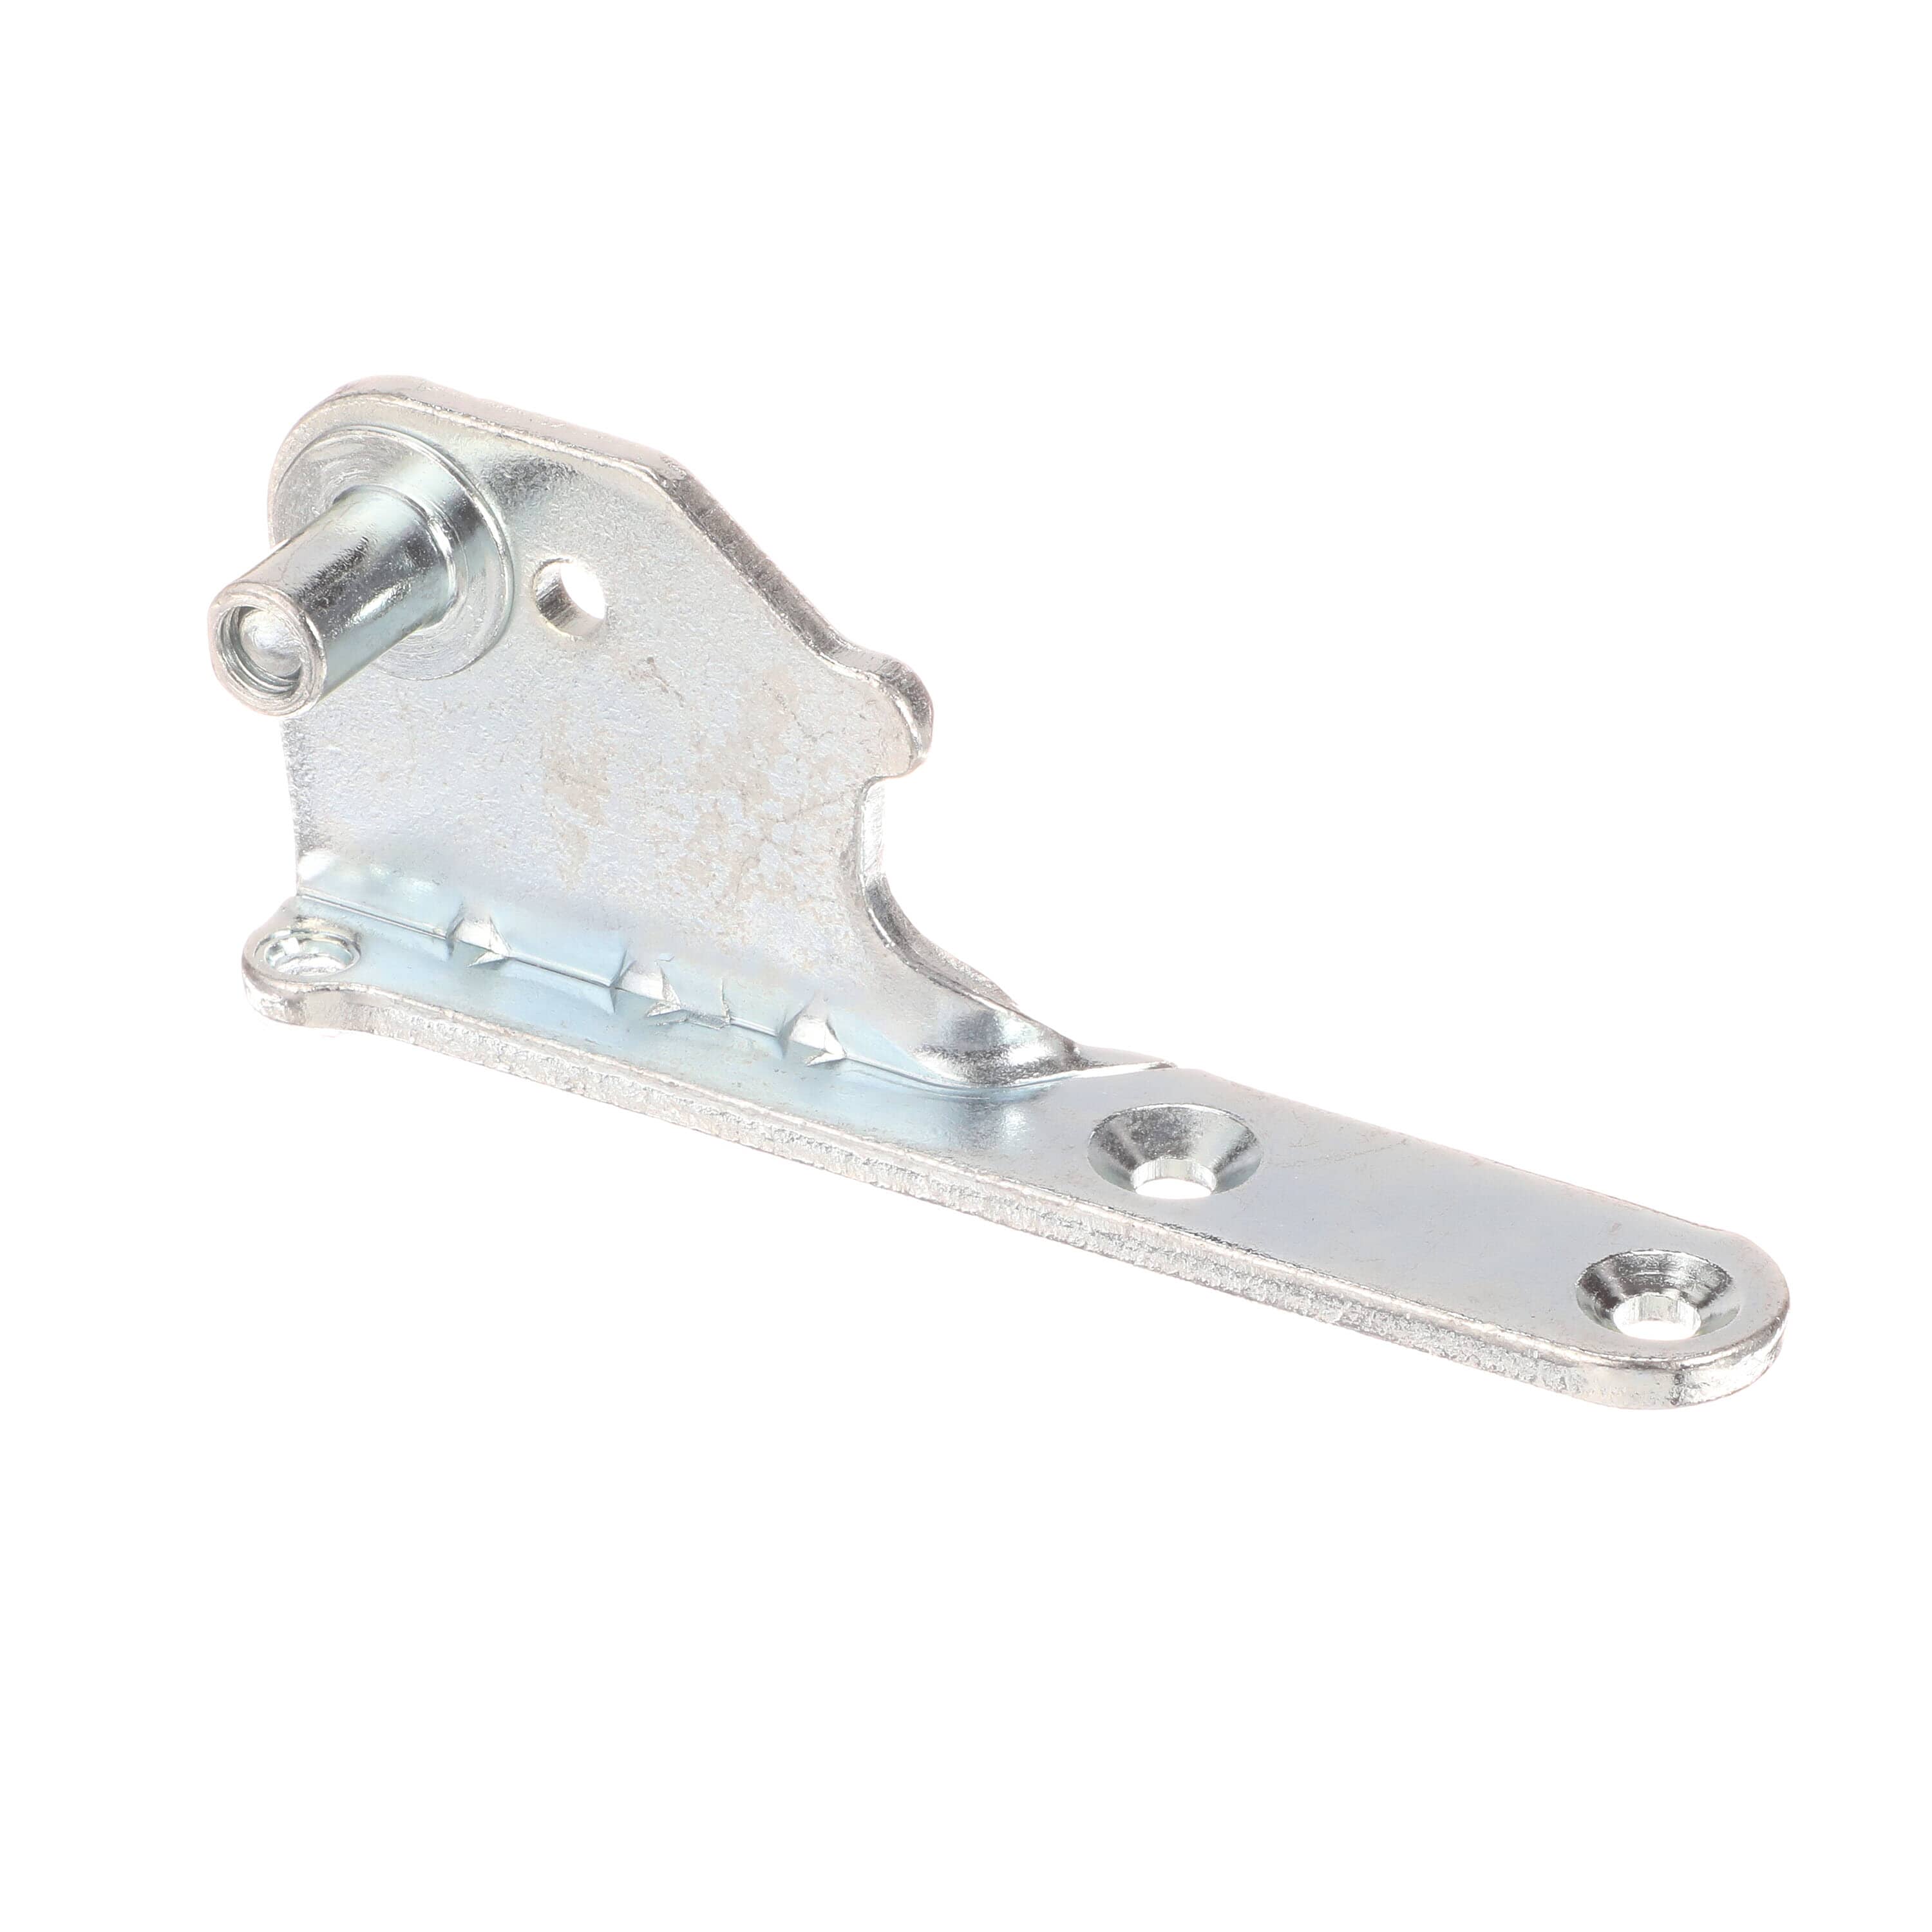 DA97-20280A ASSEMBLY HINGE-MIDDLE RIGHT - Samsung Parts USA